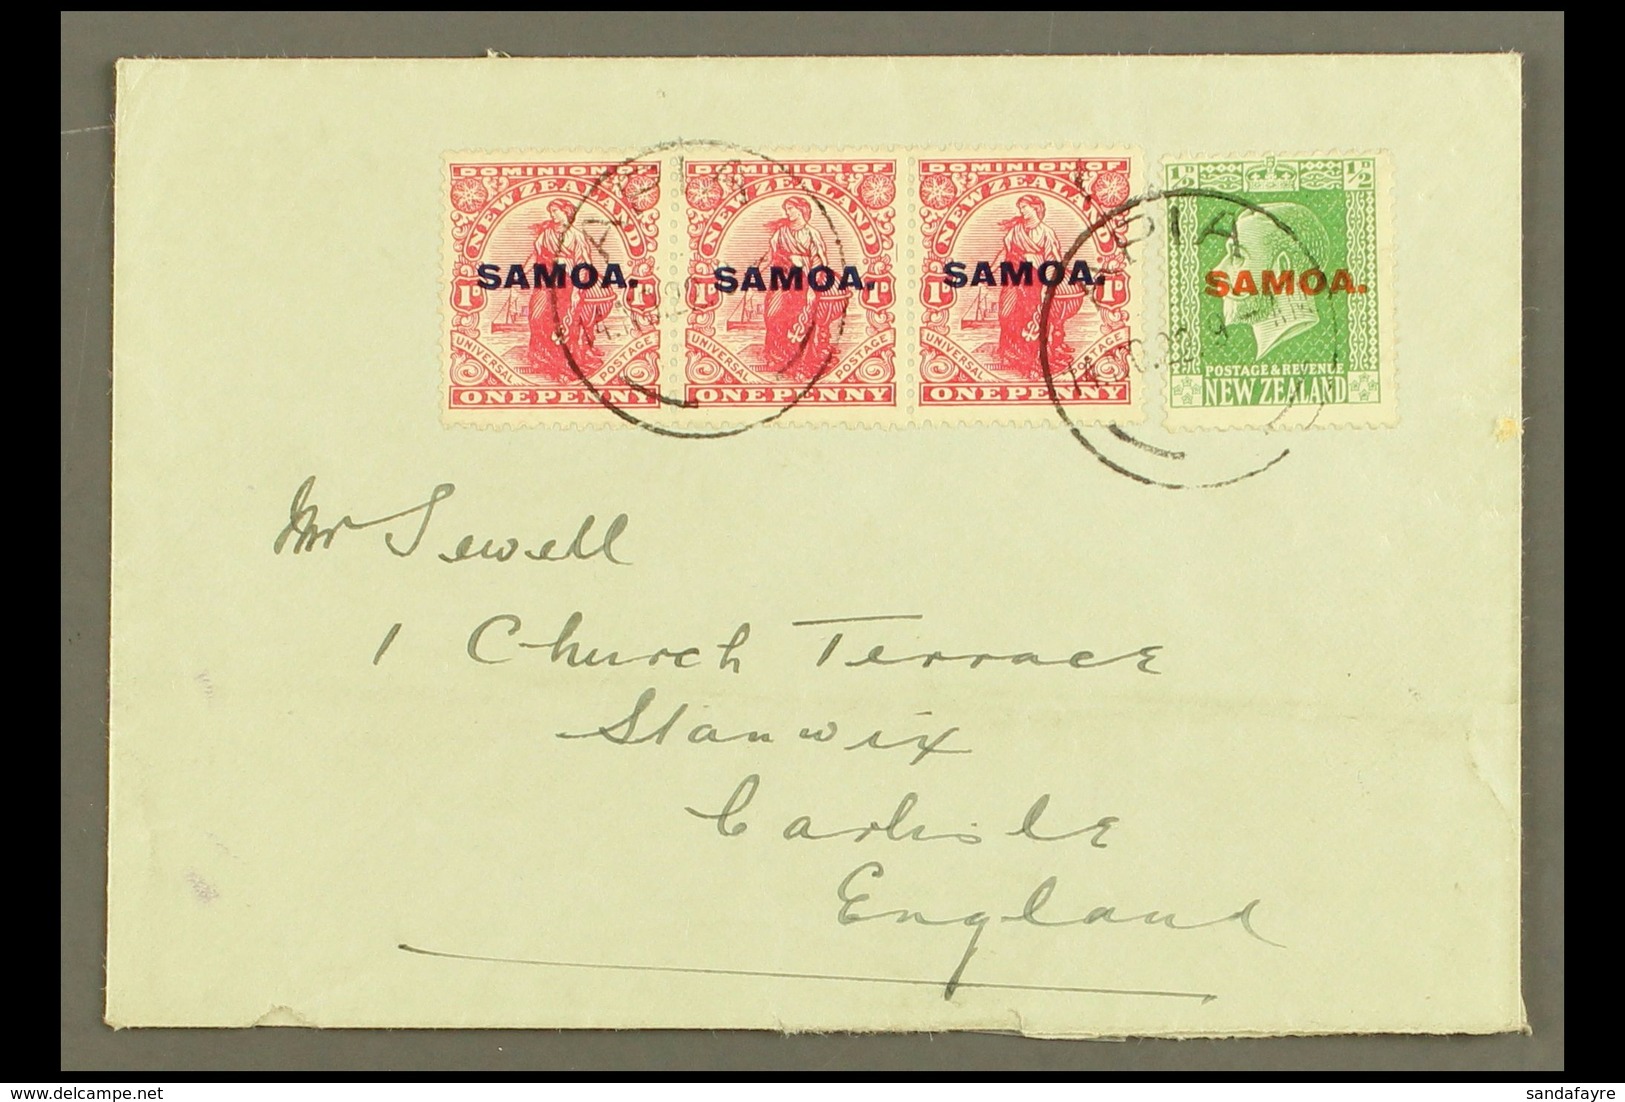 1922 Small, Plain Cover To England, Sent 3½d Rate, Franked 1d In A Strip Of 3 & KGV ½d , SG 116, 134, Apia 14.11.22 Post - Samoa